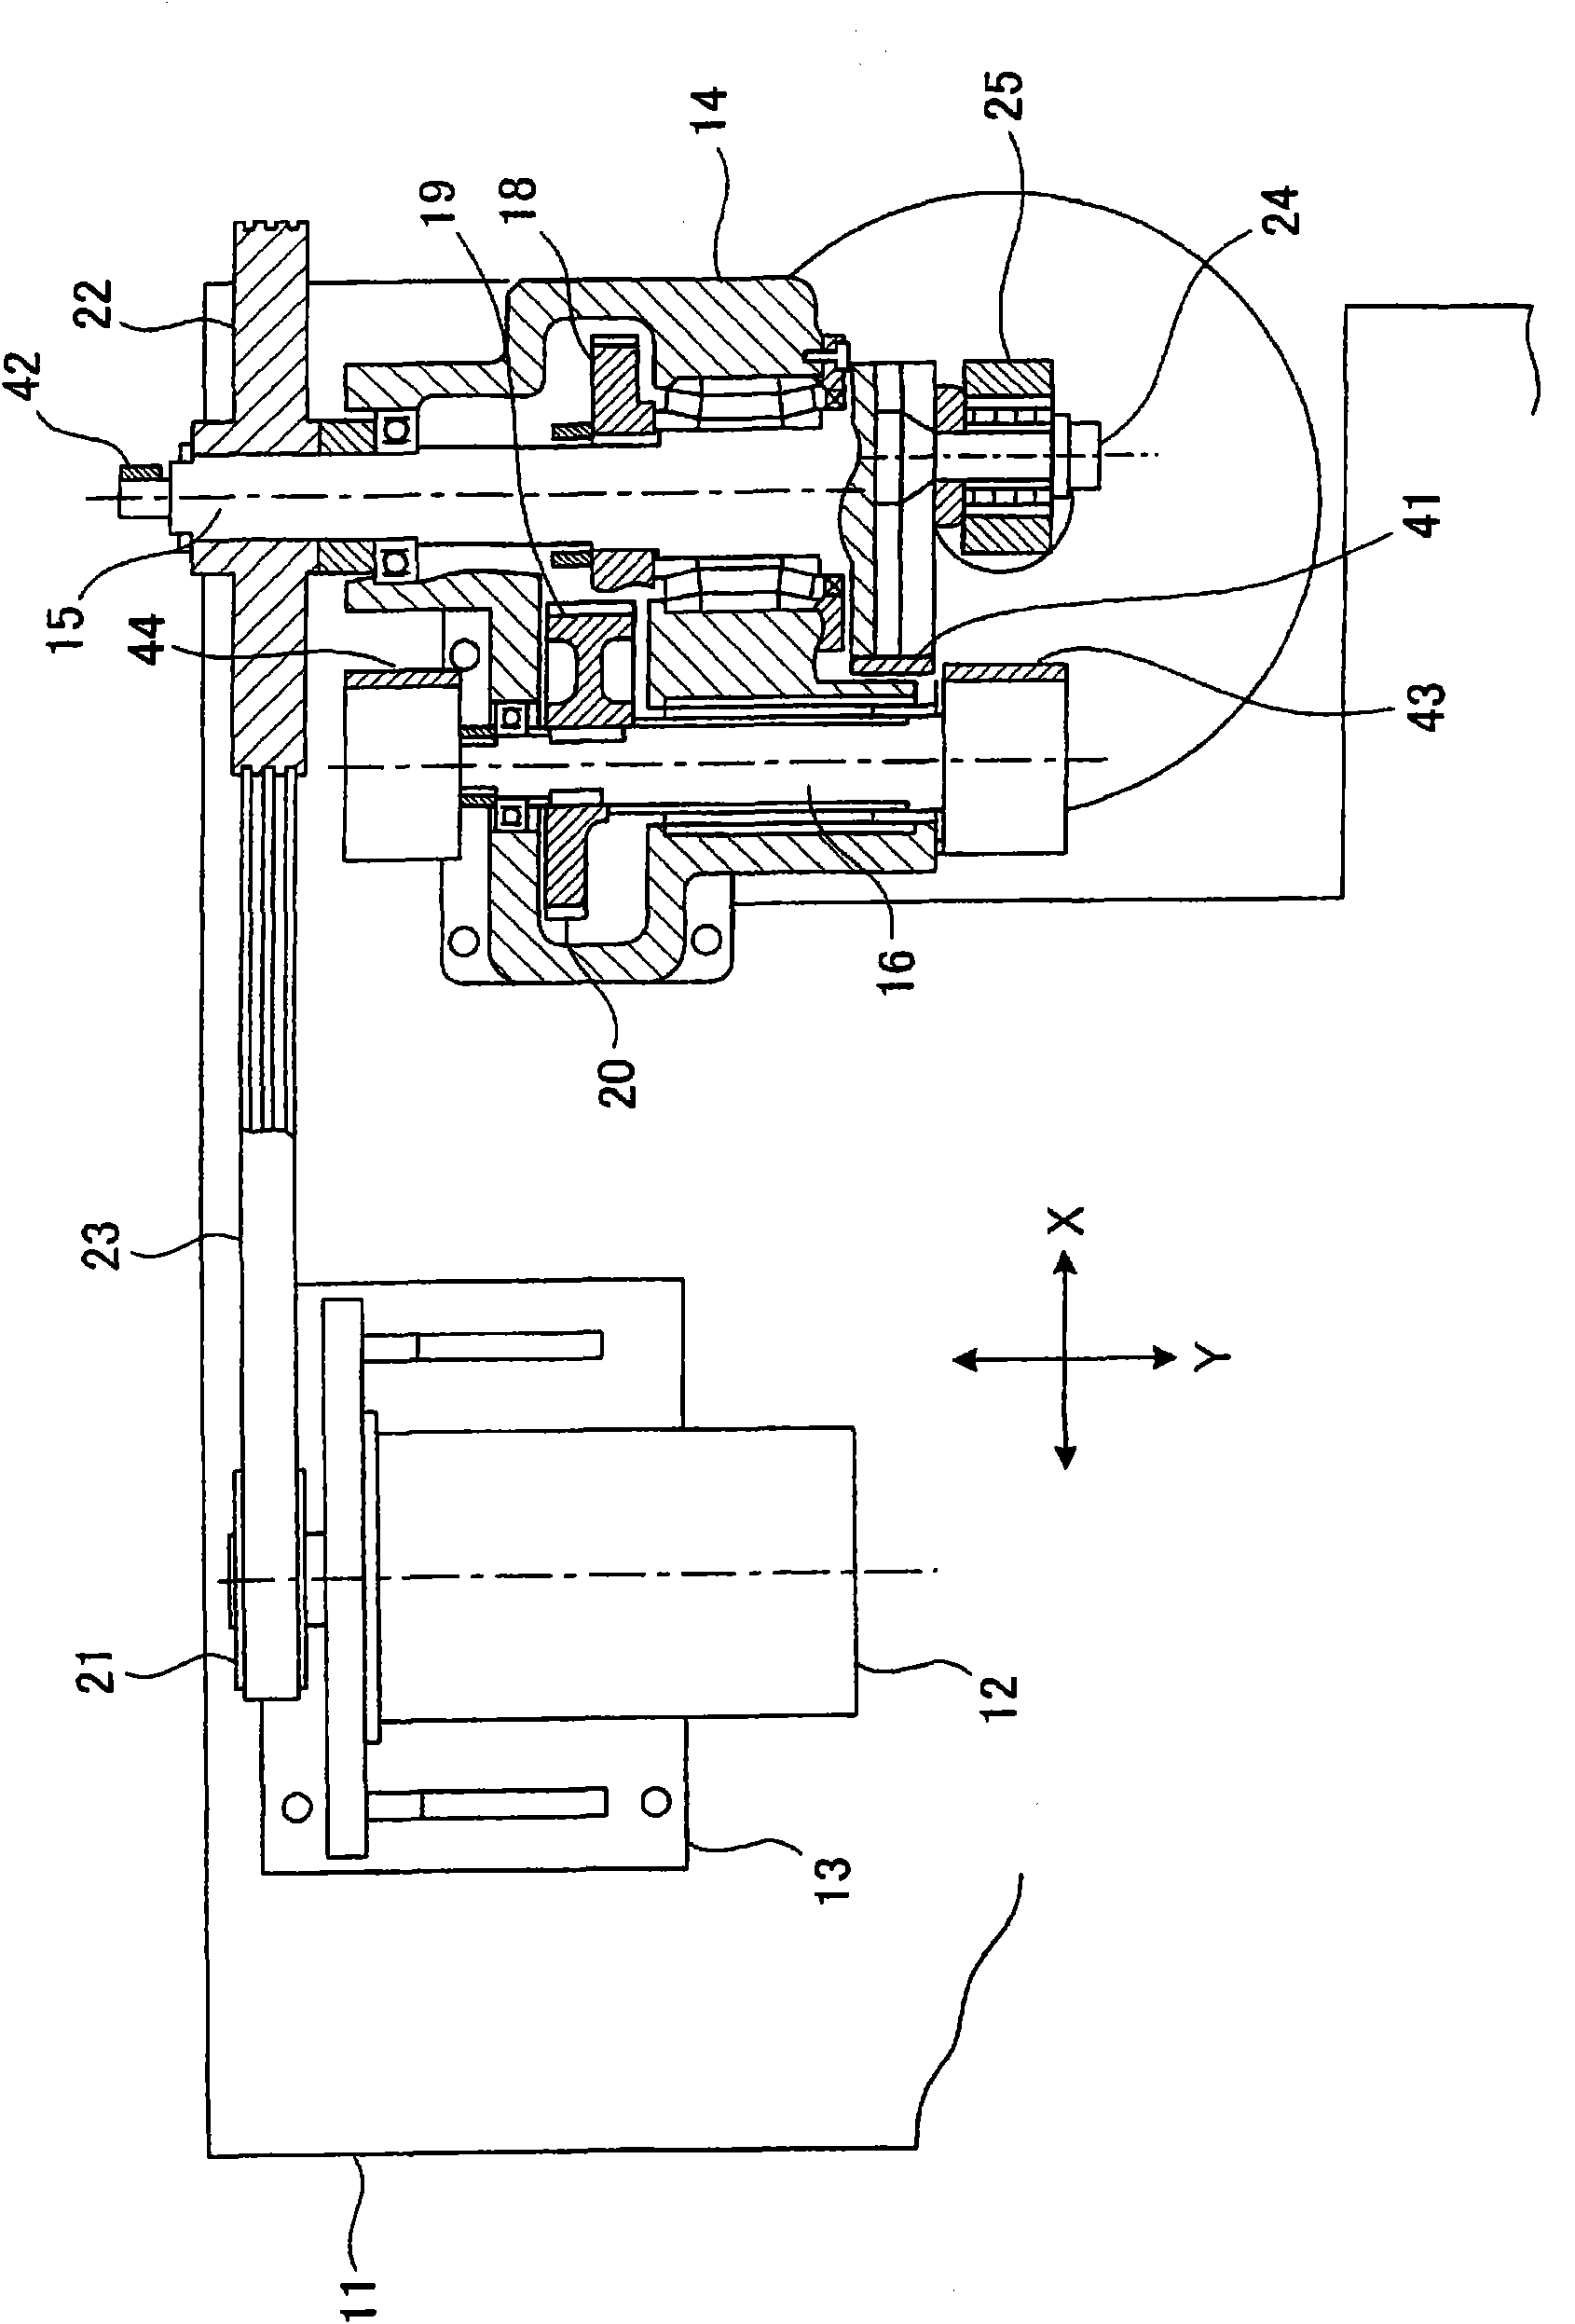 Vibration-suppressing mechanism for gear-shaping machine